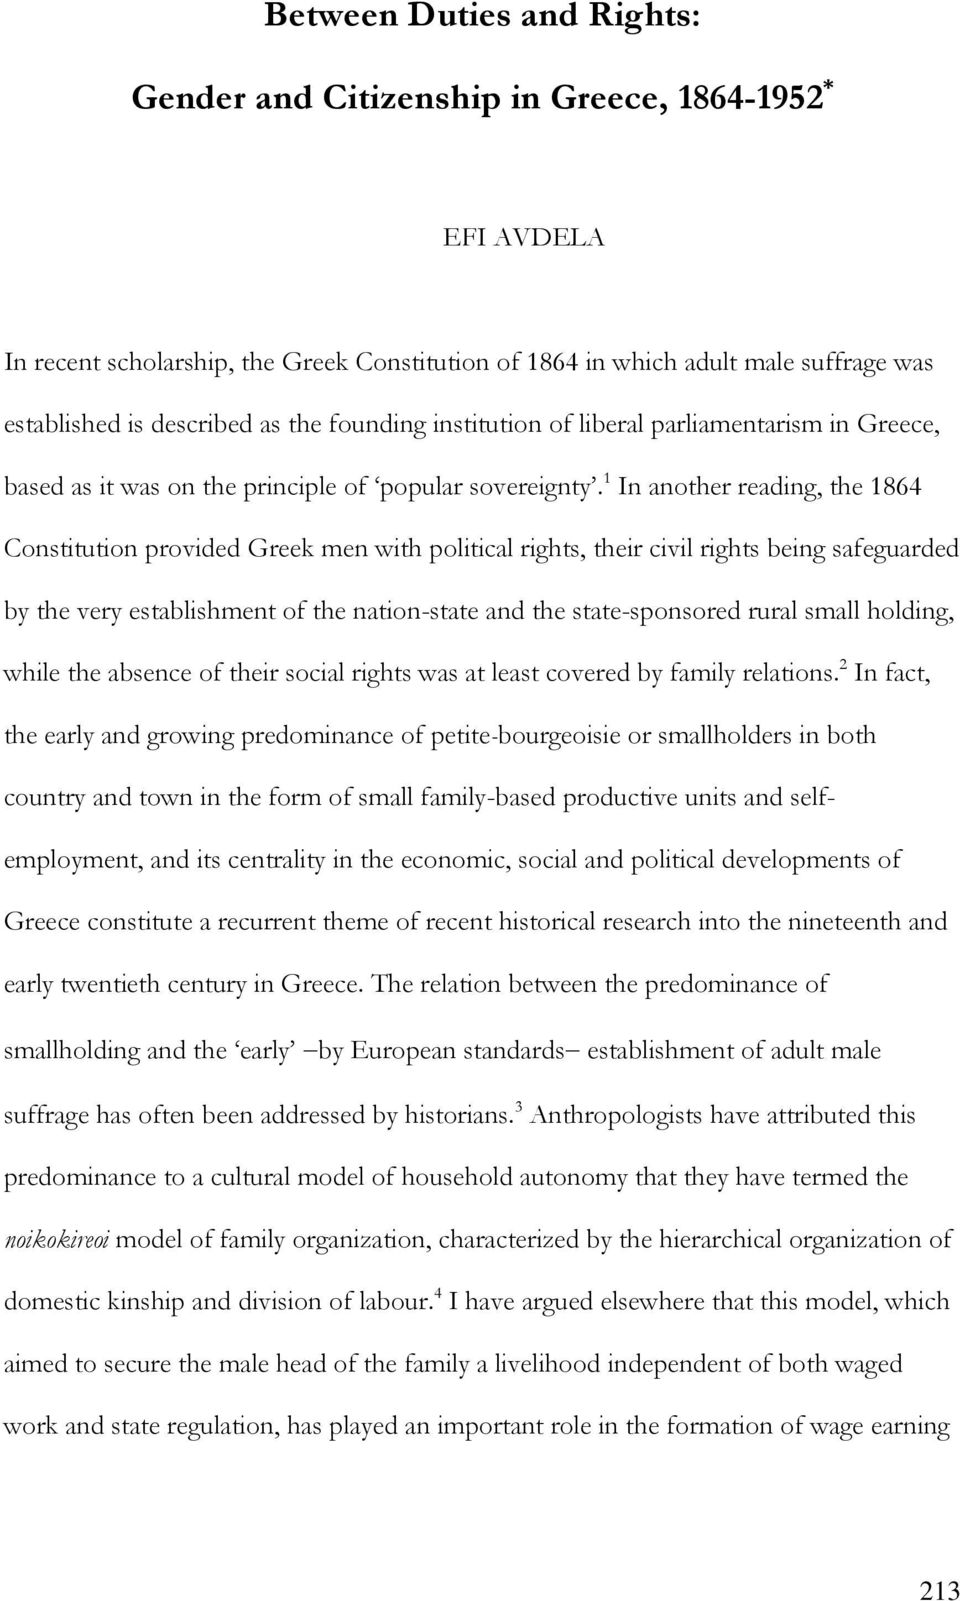 1 In another reading, the 1864 Constitution provided Greek men with political rights, their civil rights being safeguarded by the very establishment of the nation-state and the state-sponsored rural